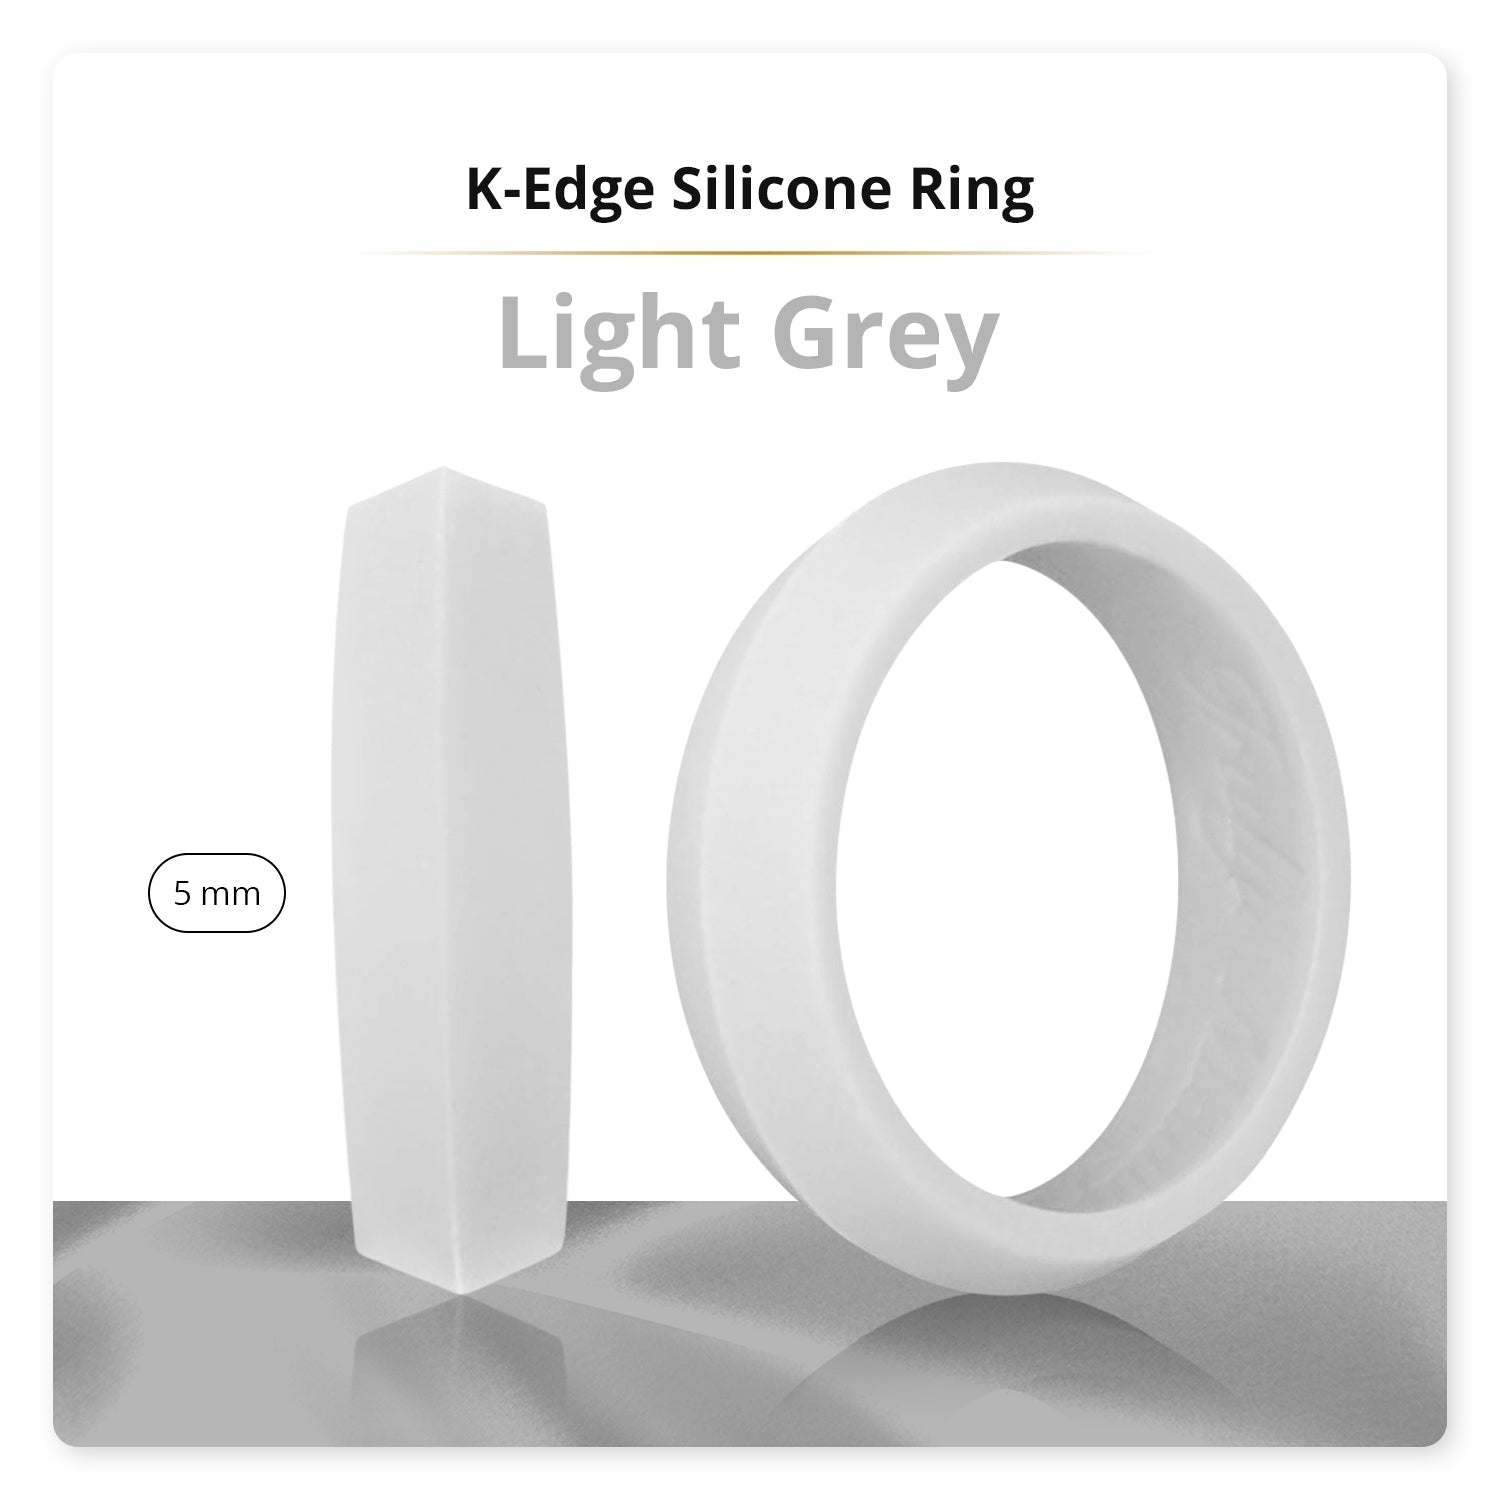 Light Grey K-Edge Silicone Ring For Women - Knot Theory